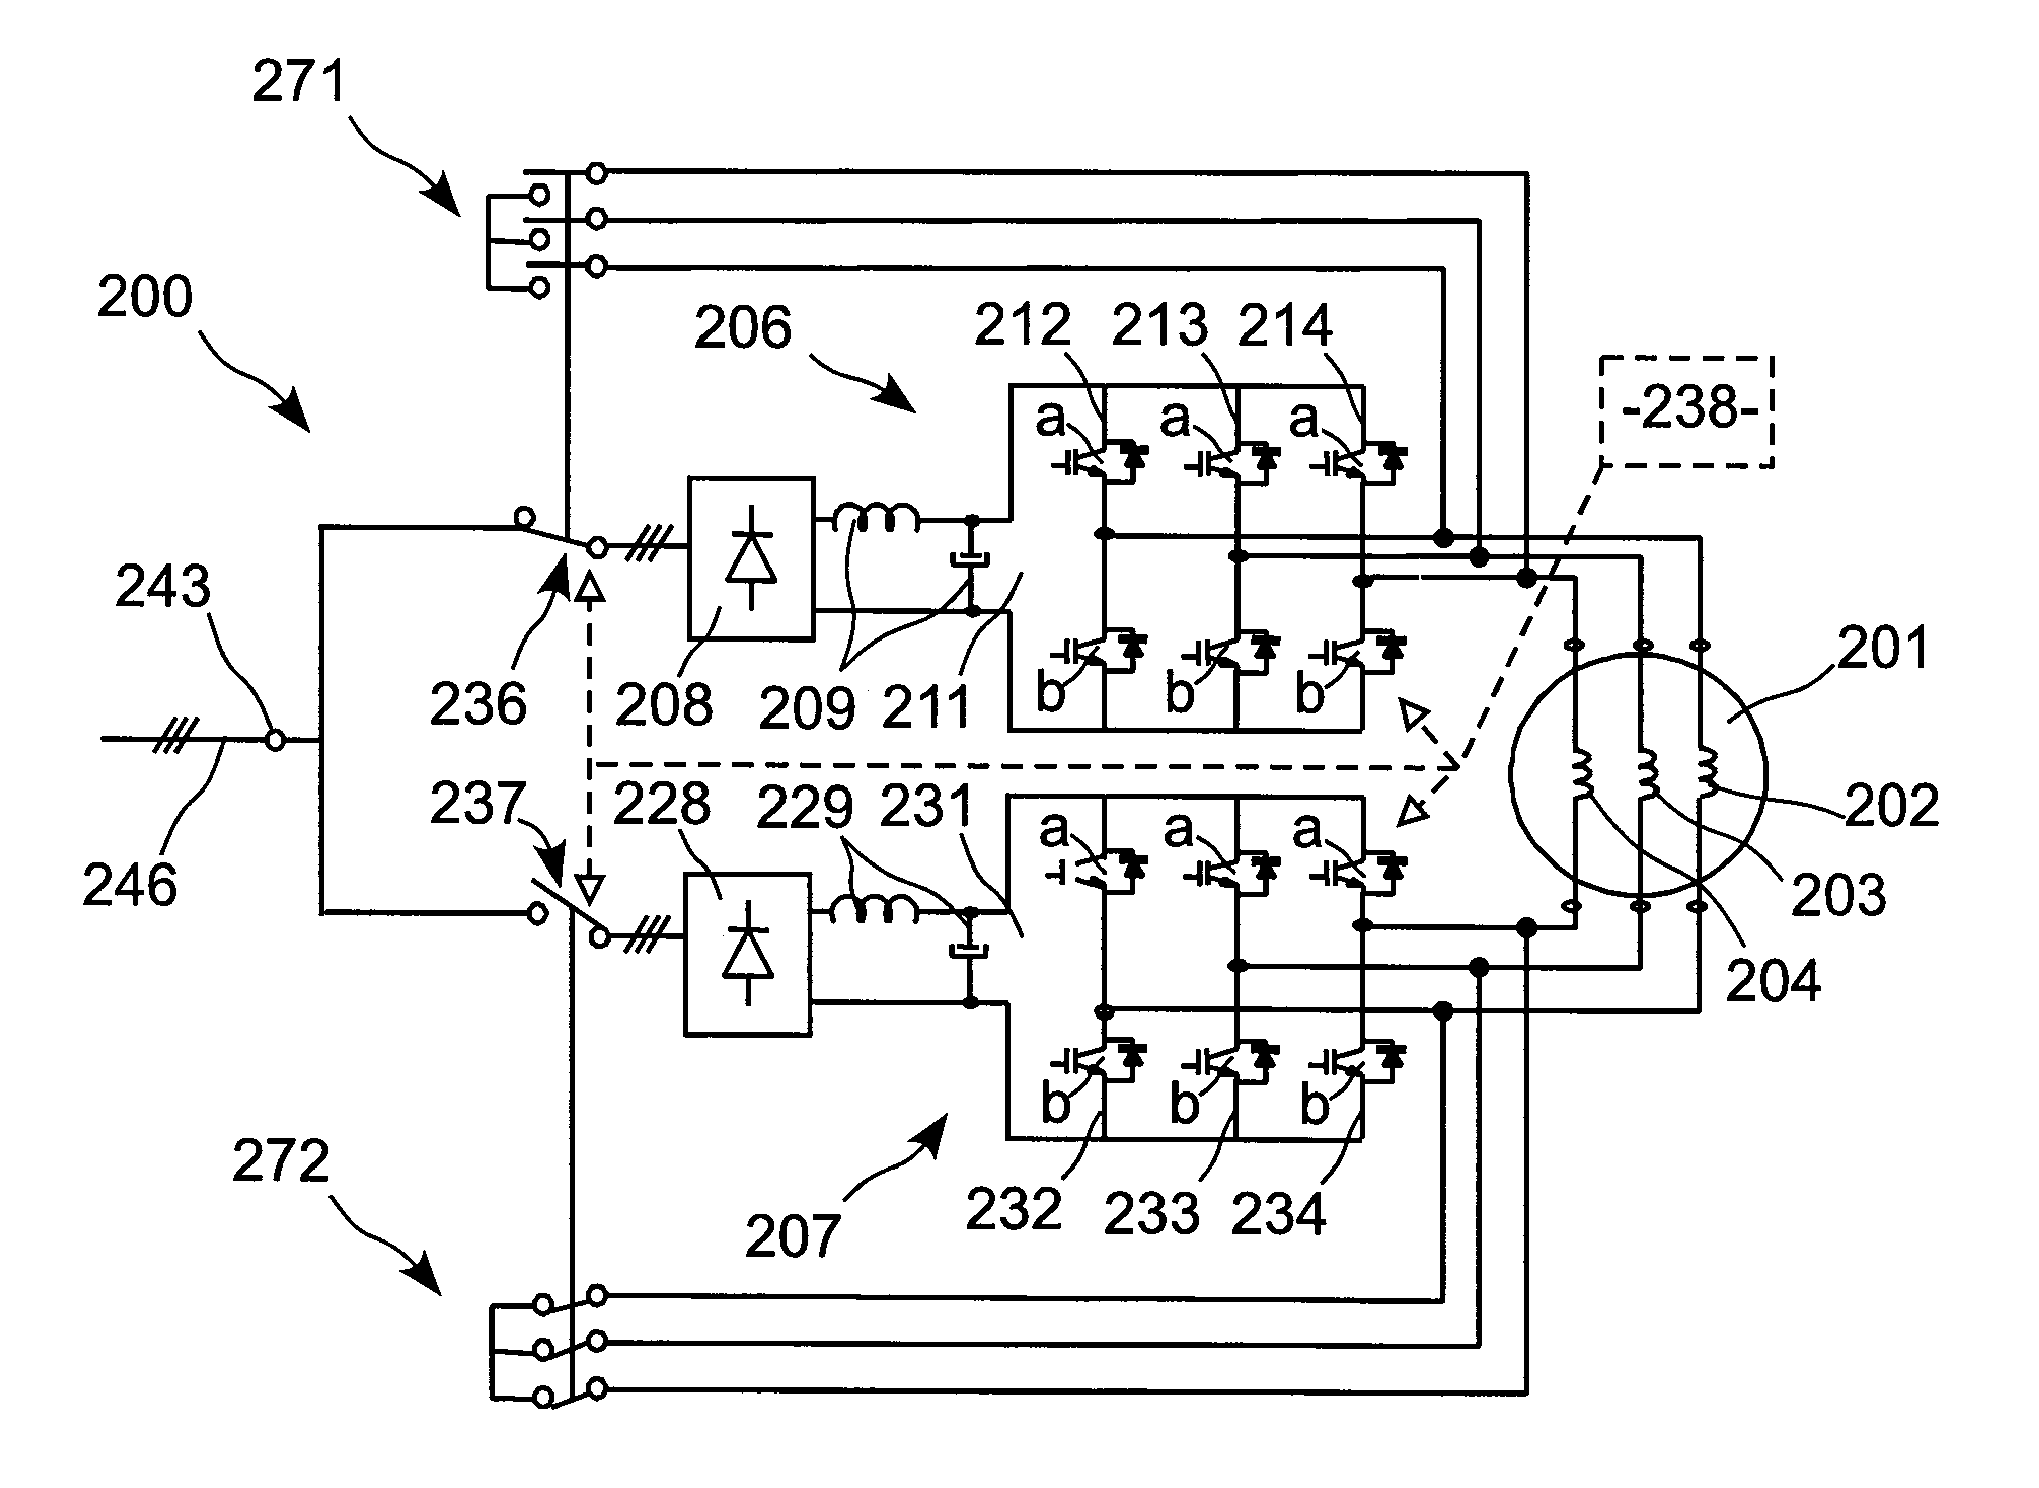 Electric actuator including two current-controlled voltage inverters powering an electric machine, and reconfigurable in the presence of a defect